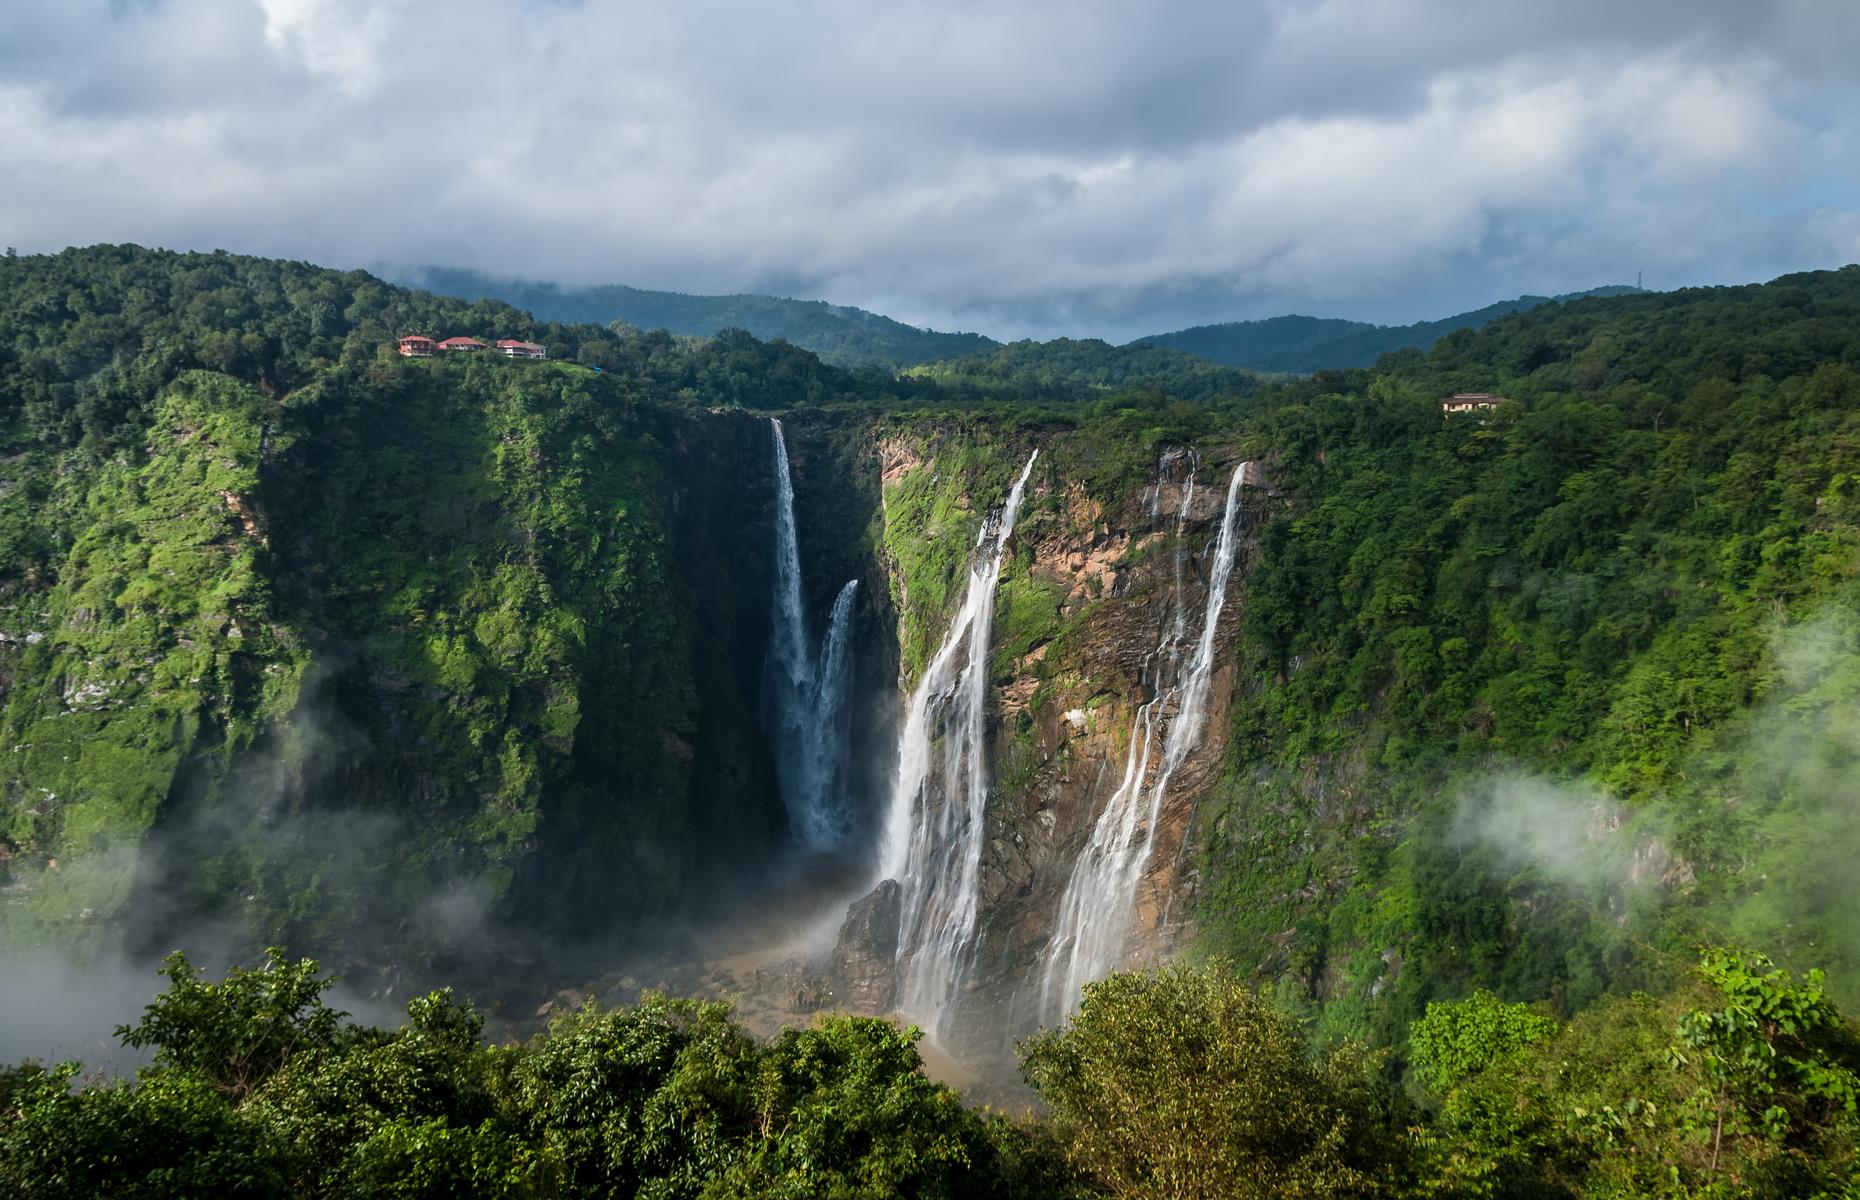 <p>One of India’s highest and most impressive waterfalls, visit the Jog Falls during monsoon season to see the water thundering down in all its glory at the head of the Sharavati River. Head to Watkins Platform to admire this force of nature, then hike to the base of the falls to take a dip in the river.</p>